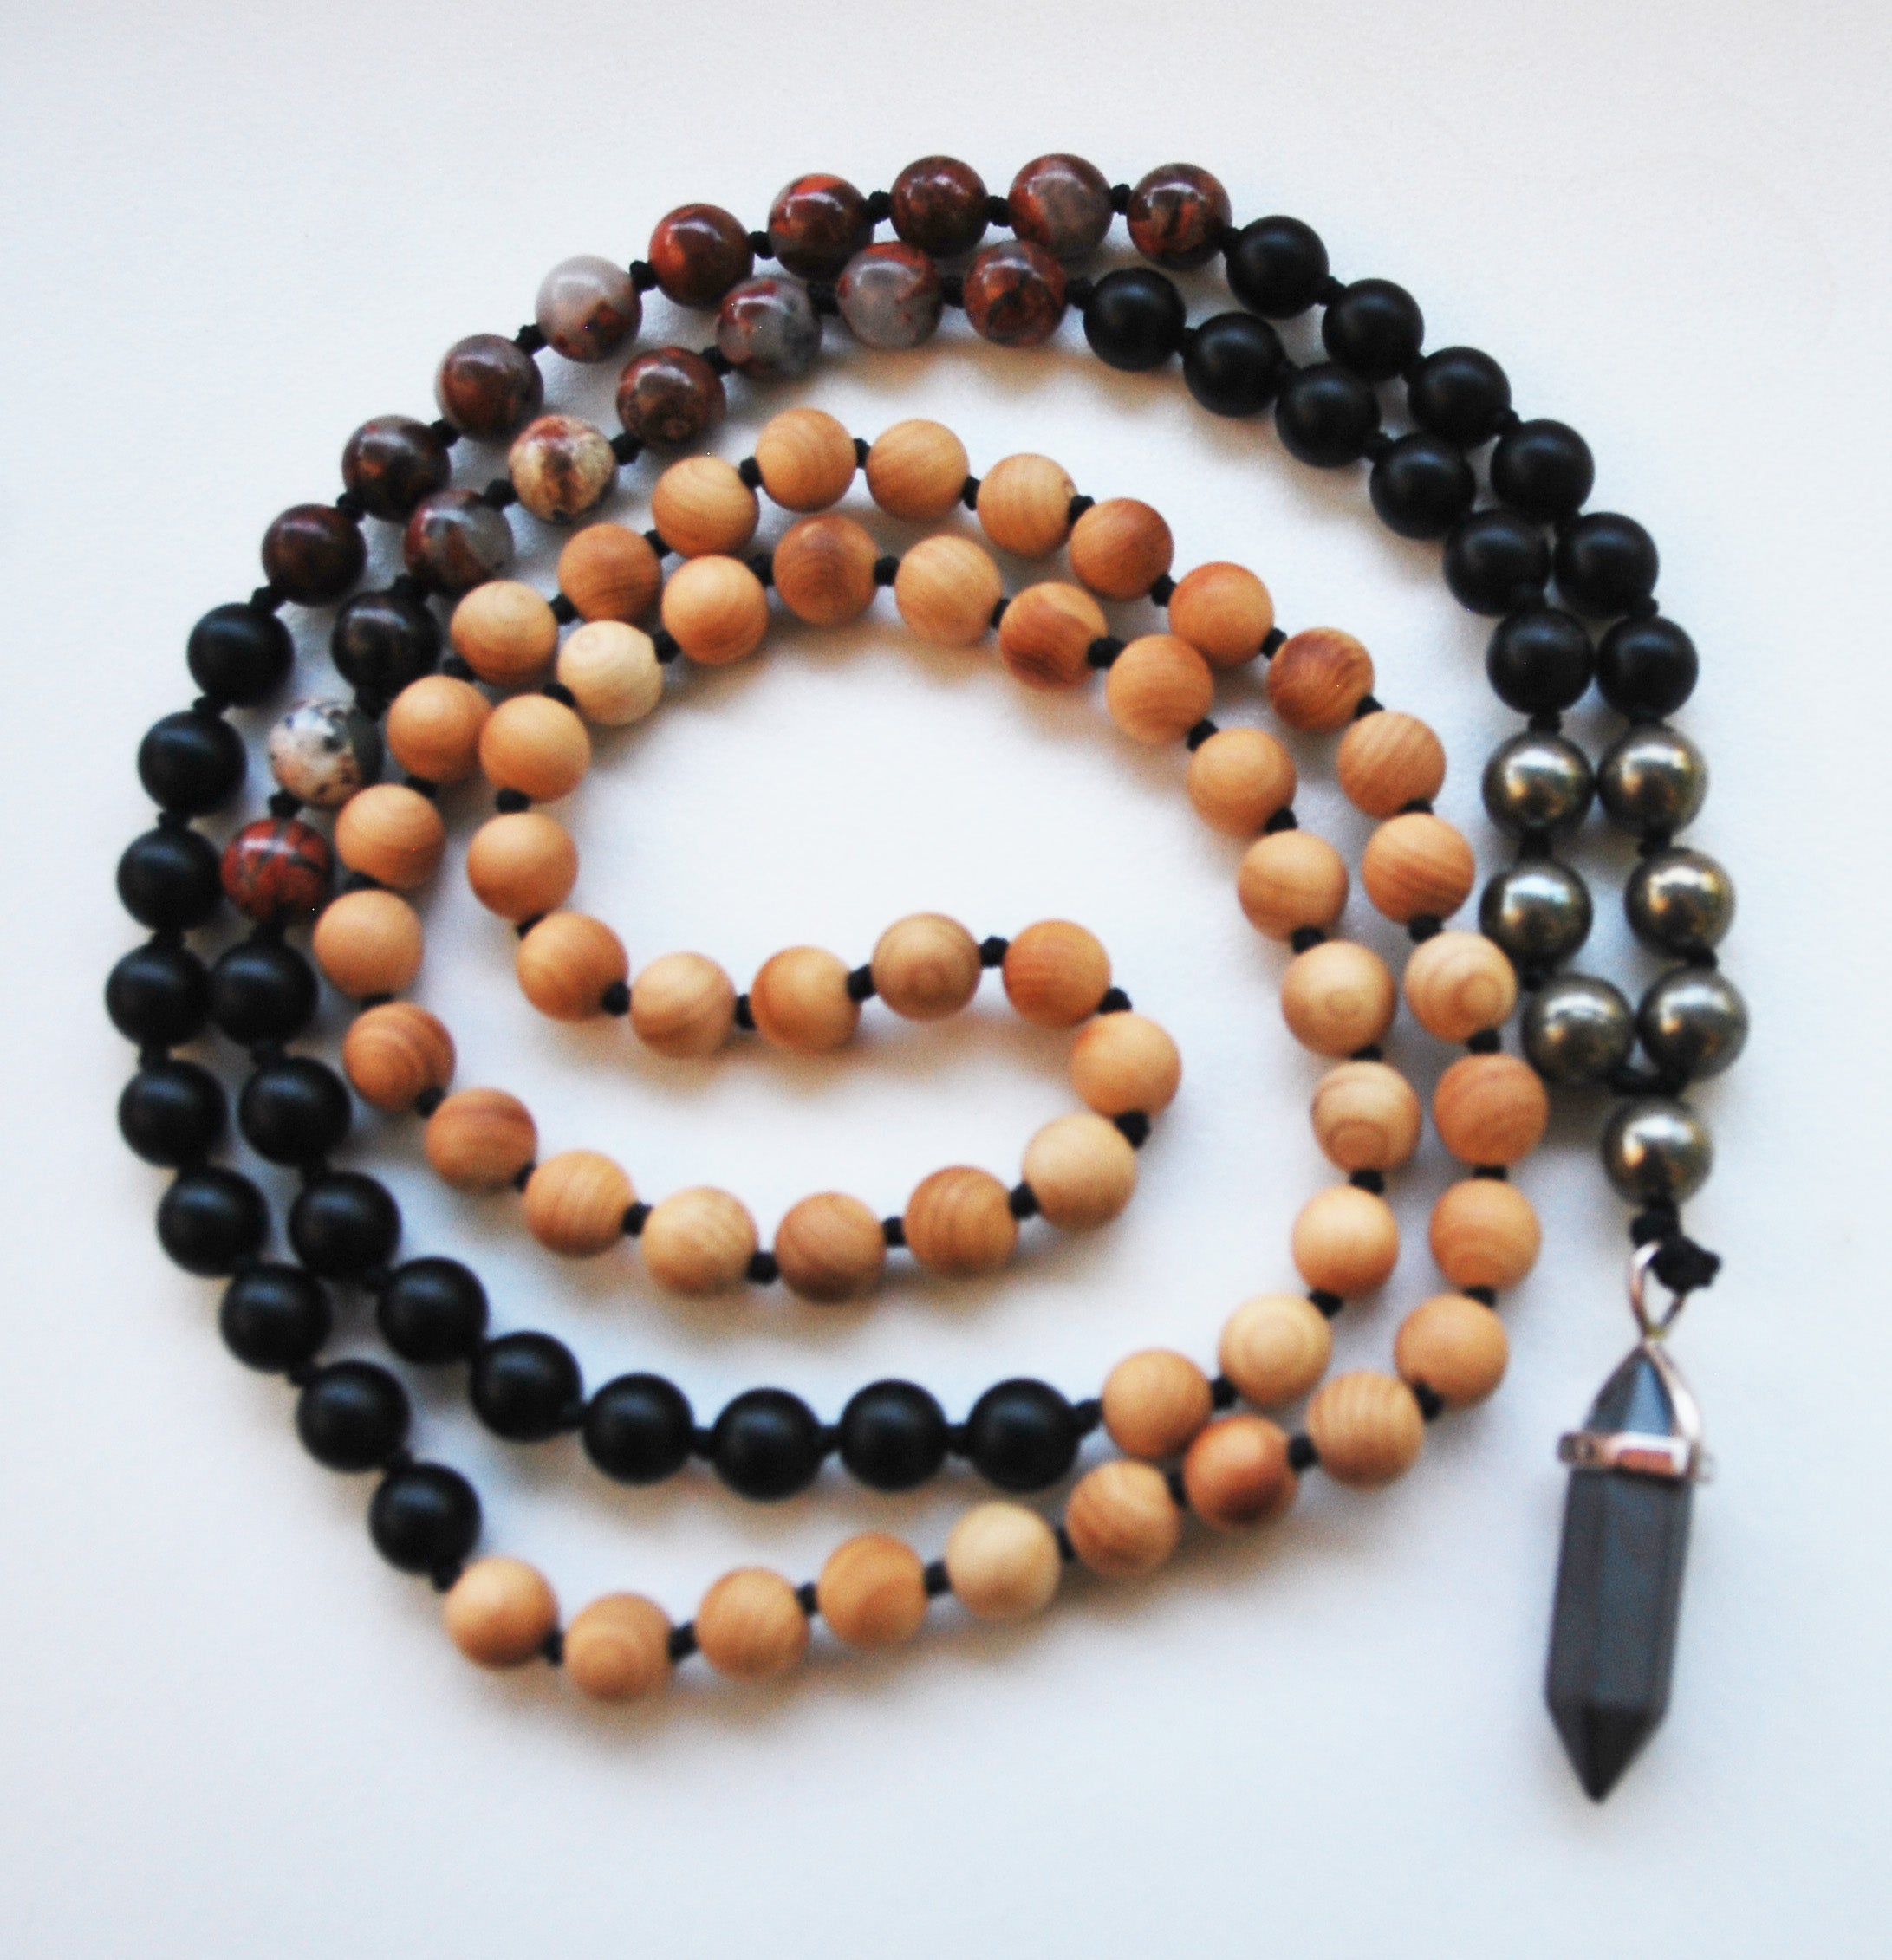 Cypress & Bloodstone 108 Knotted Mala Necklace with Cotton Tassel